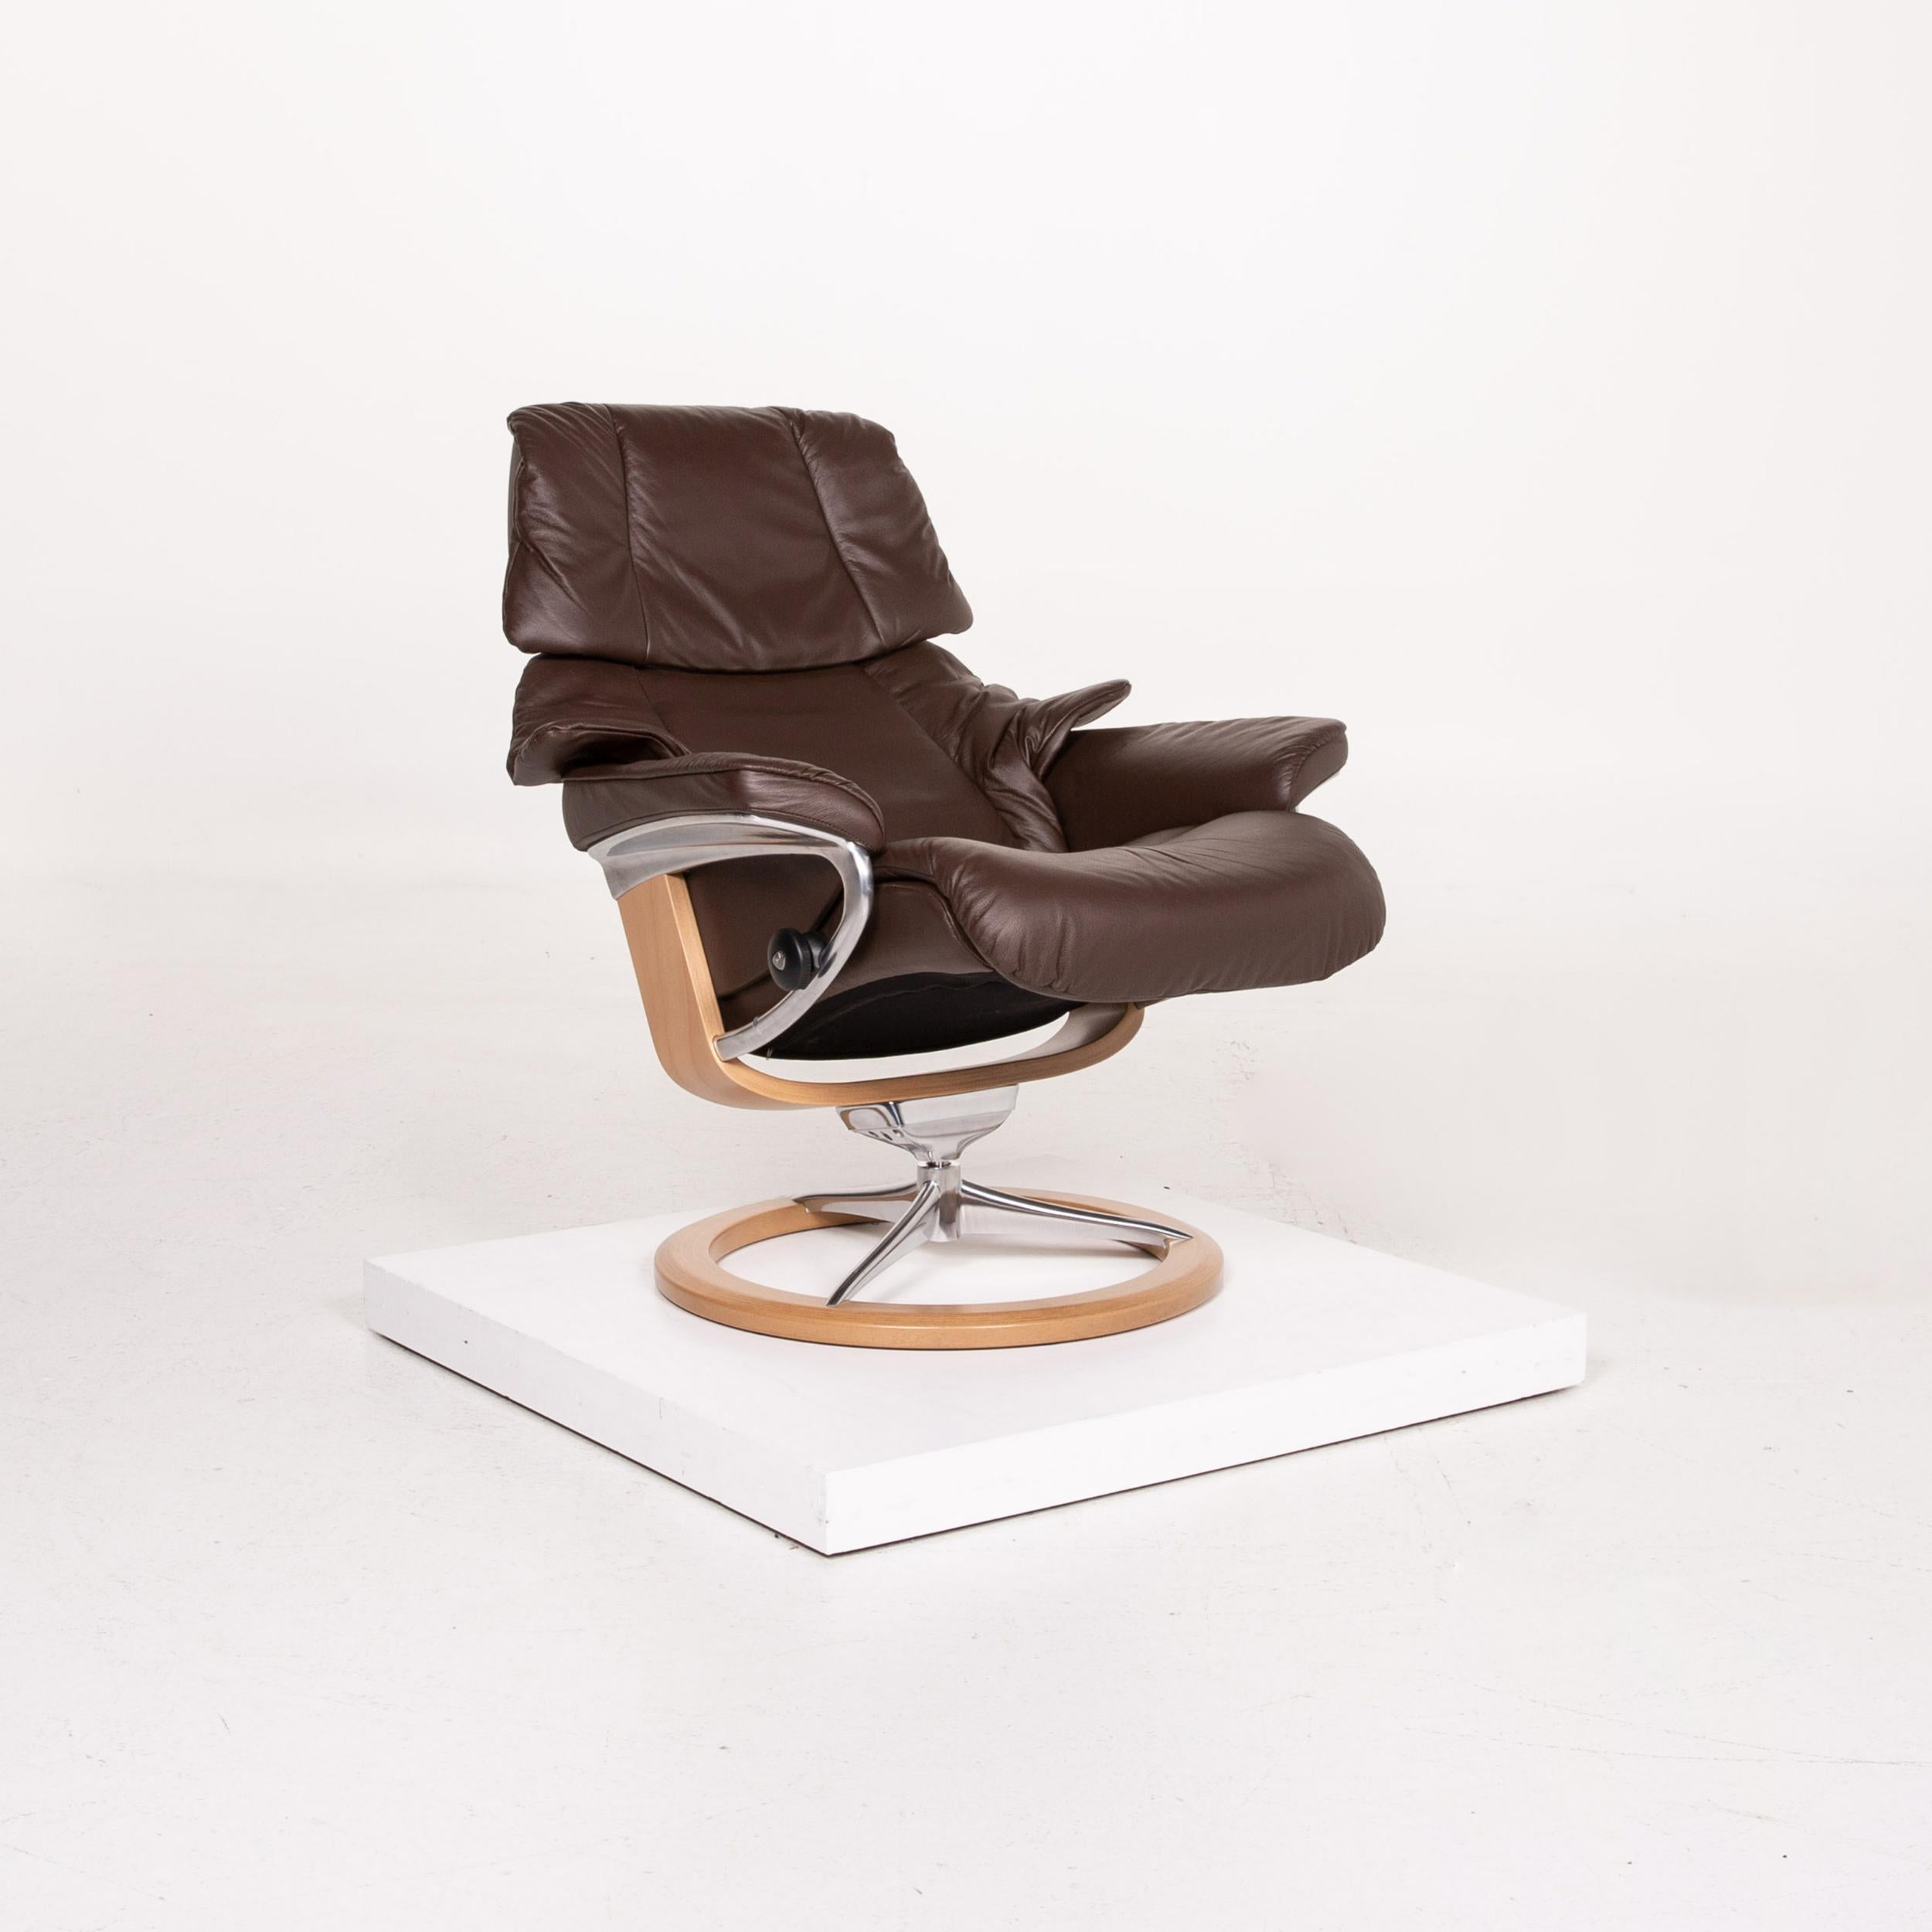 Modern Stressless Reno Leather Armchair Incl. Stool Dark Brown Brown Relaxation